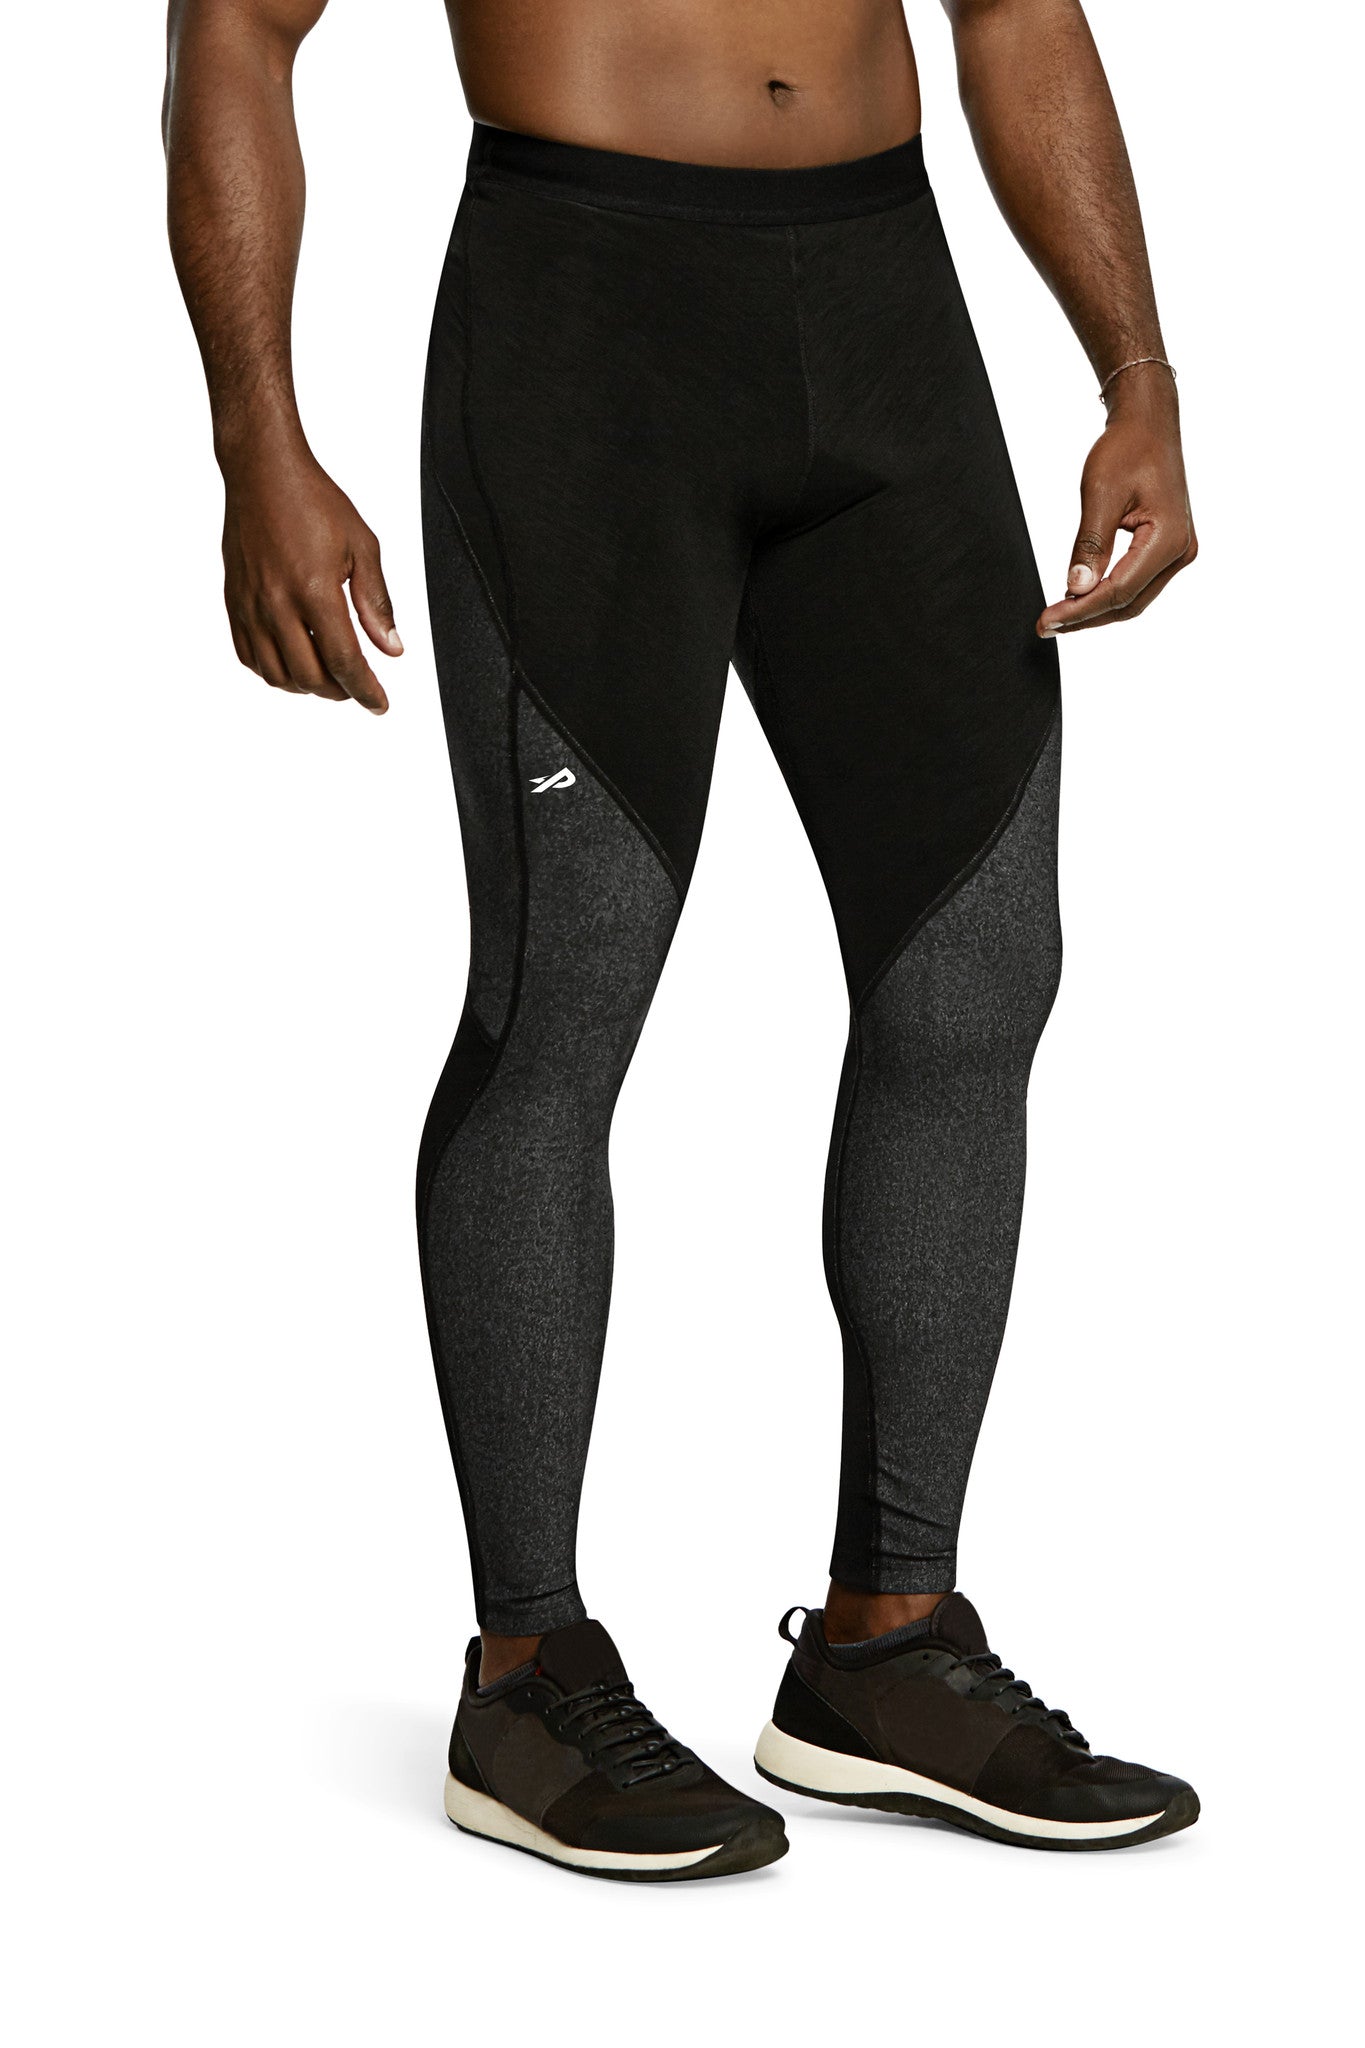 Buy Real Essentials 3 Pack: Men's Active Compression Pants - Workout Base  Layer Tights Leggings, Set G, Small at Amazon.in